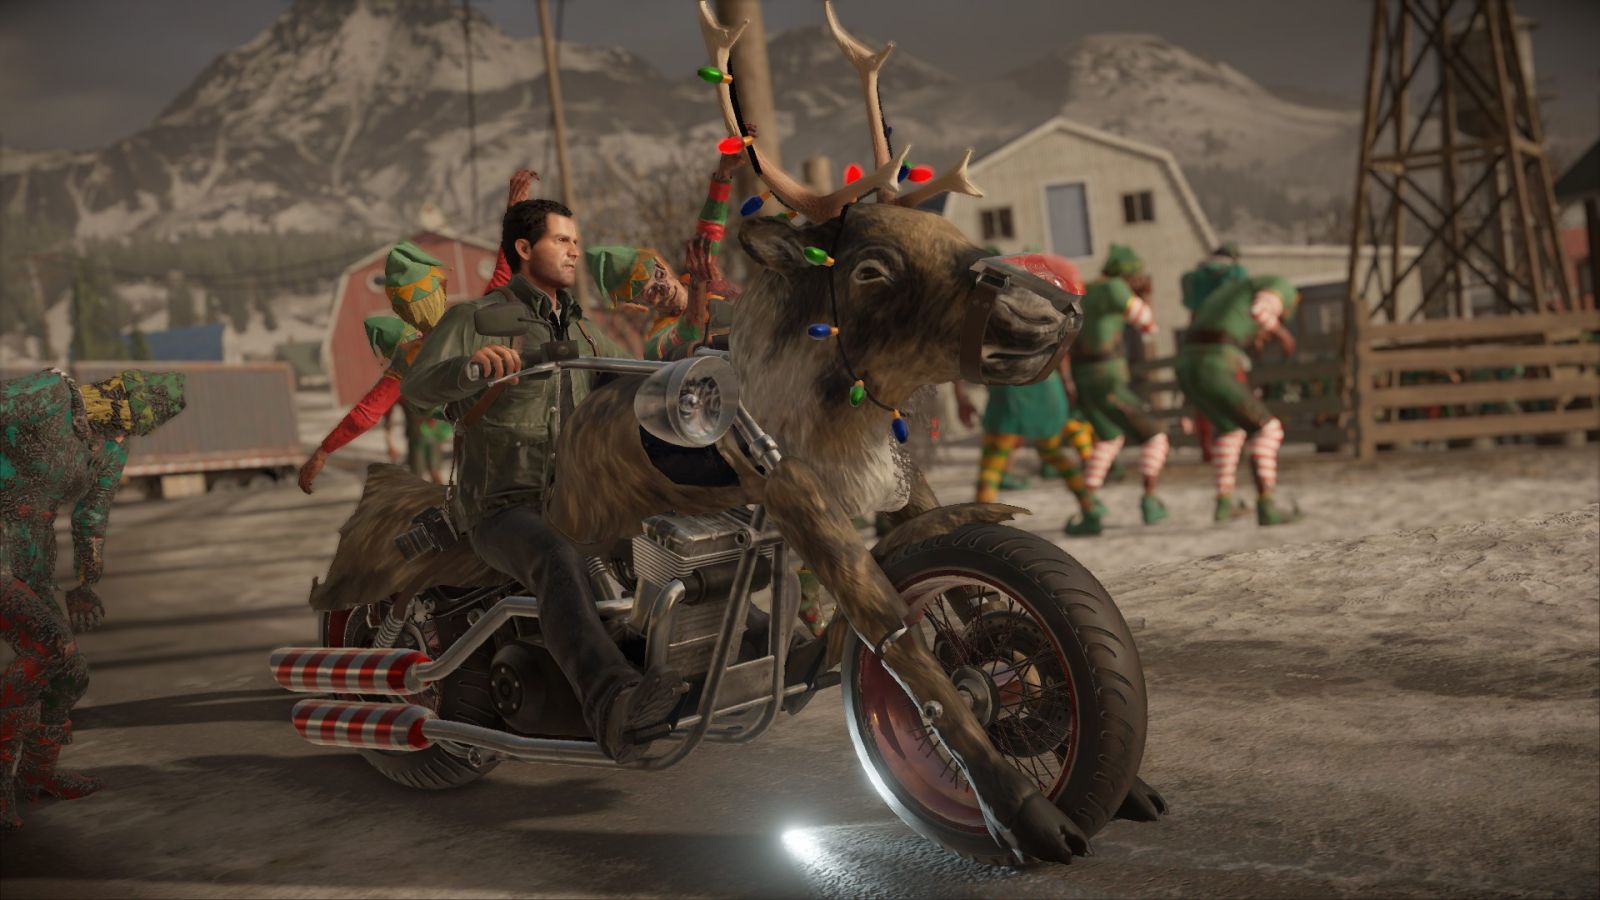 More zombie slaying action in latest Dead Rising game